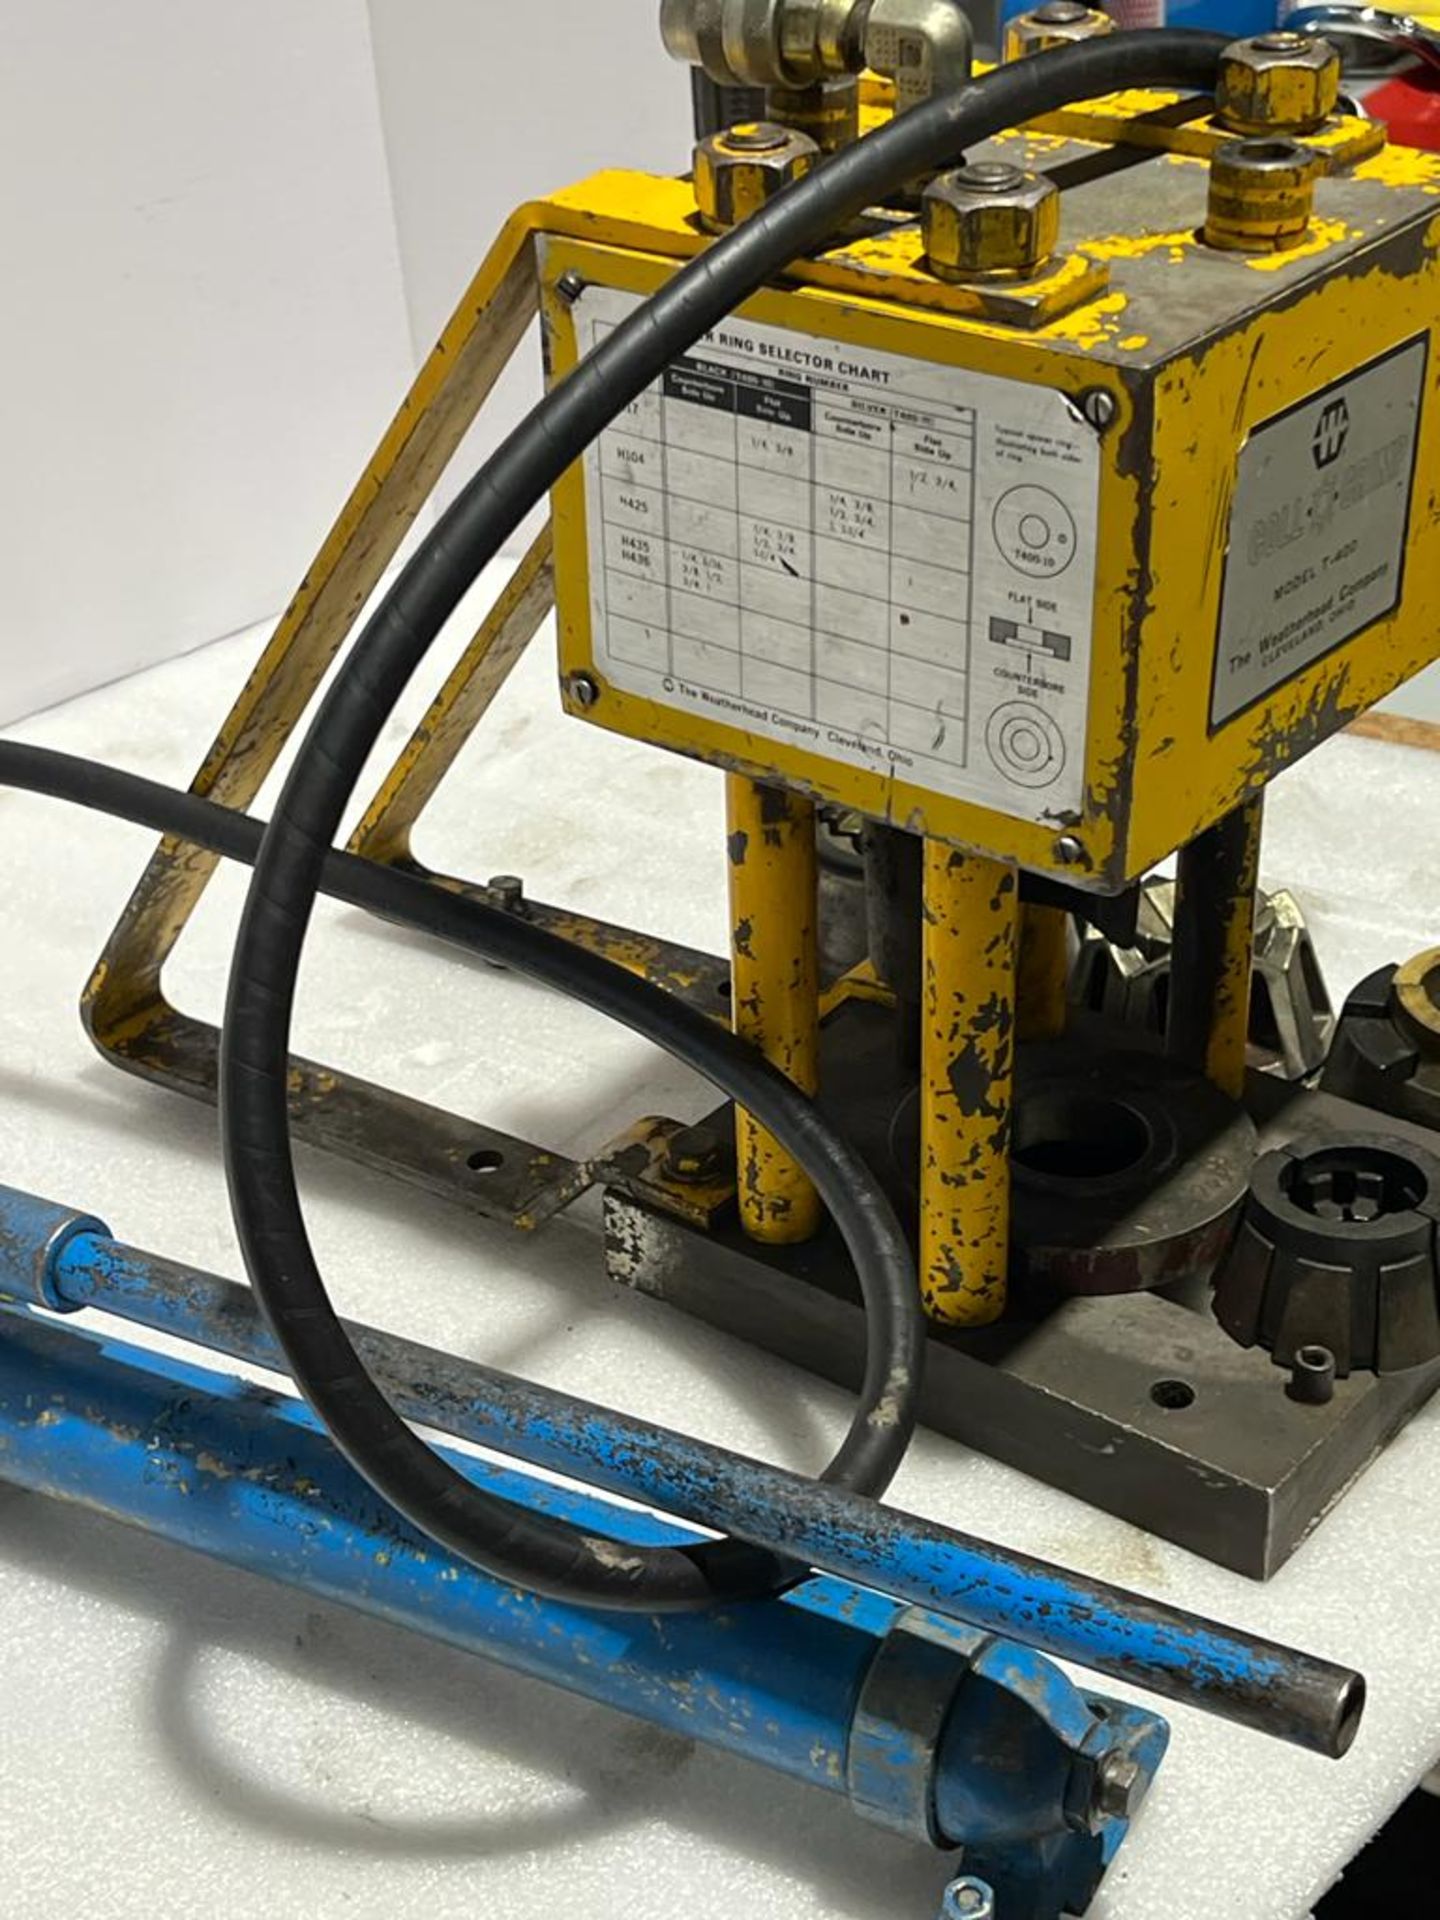 Weatherhead Coll-O-Crimp model T400 Hydraulic Hose Crimper Complete with Hydraulic Hand Pump - Image 3 of 3